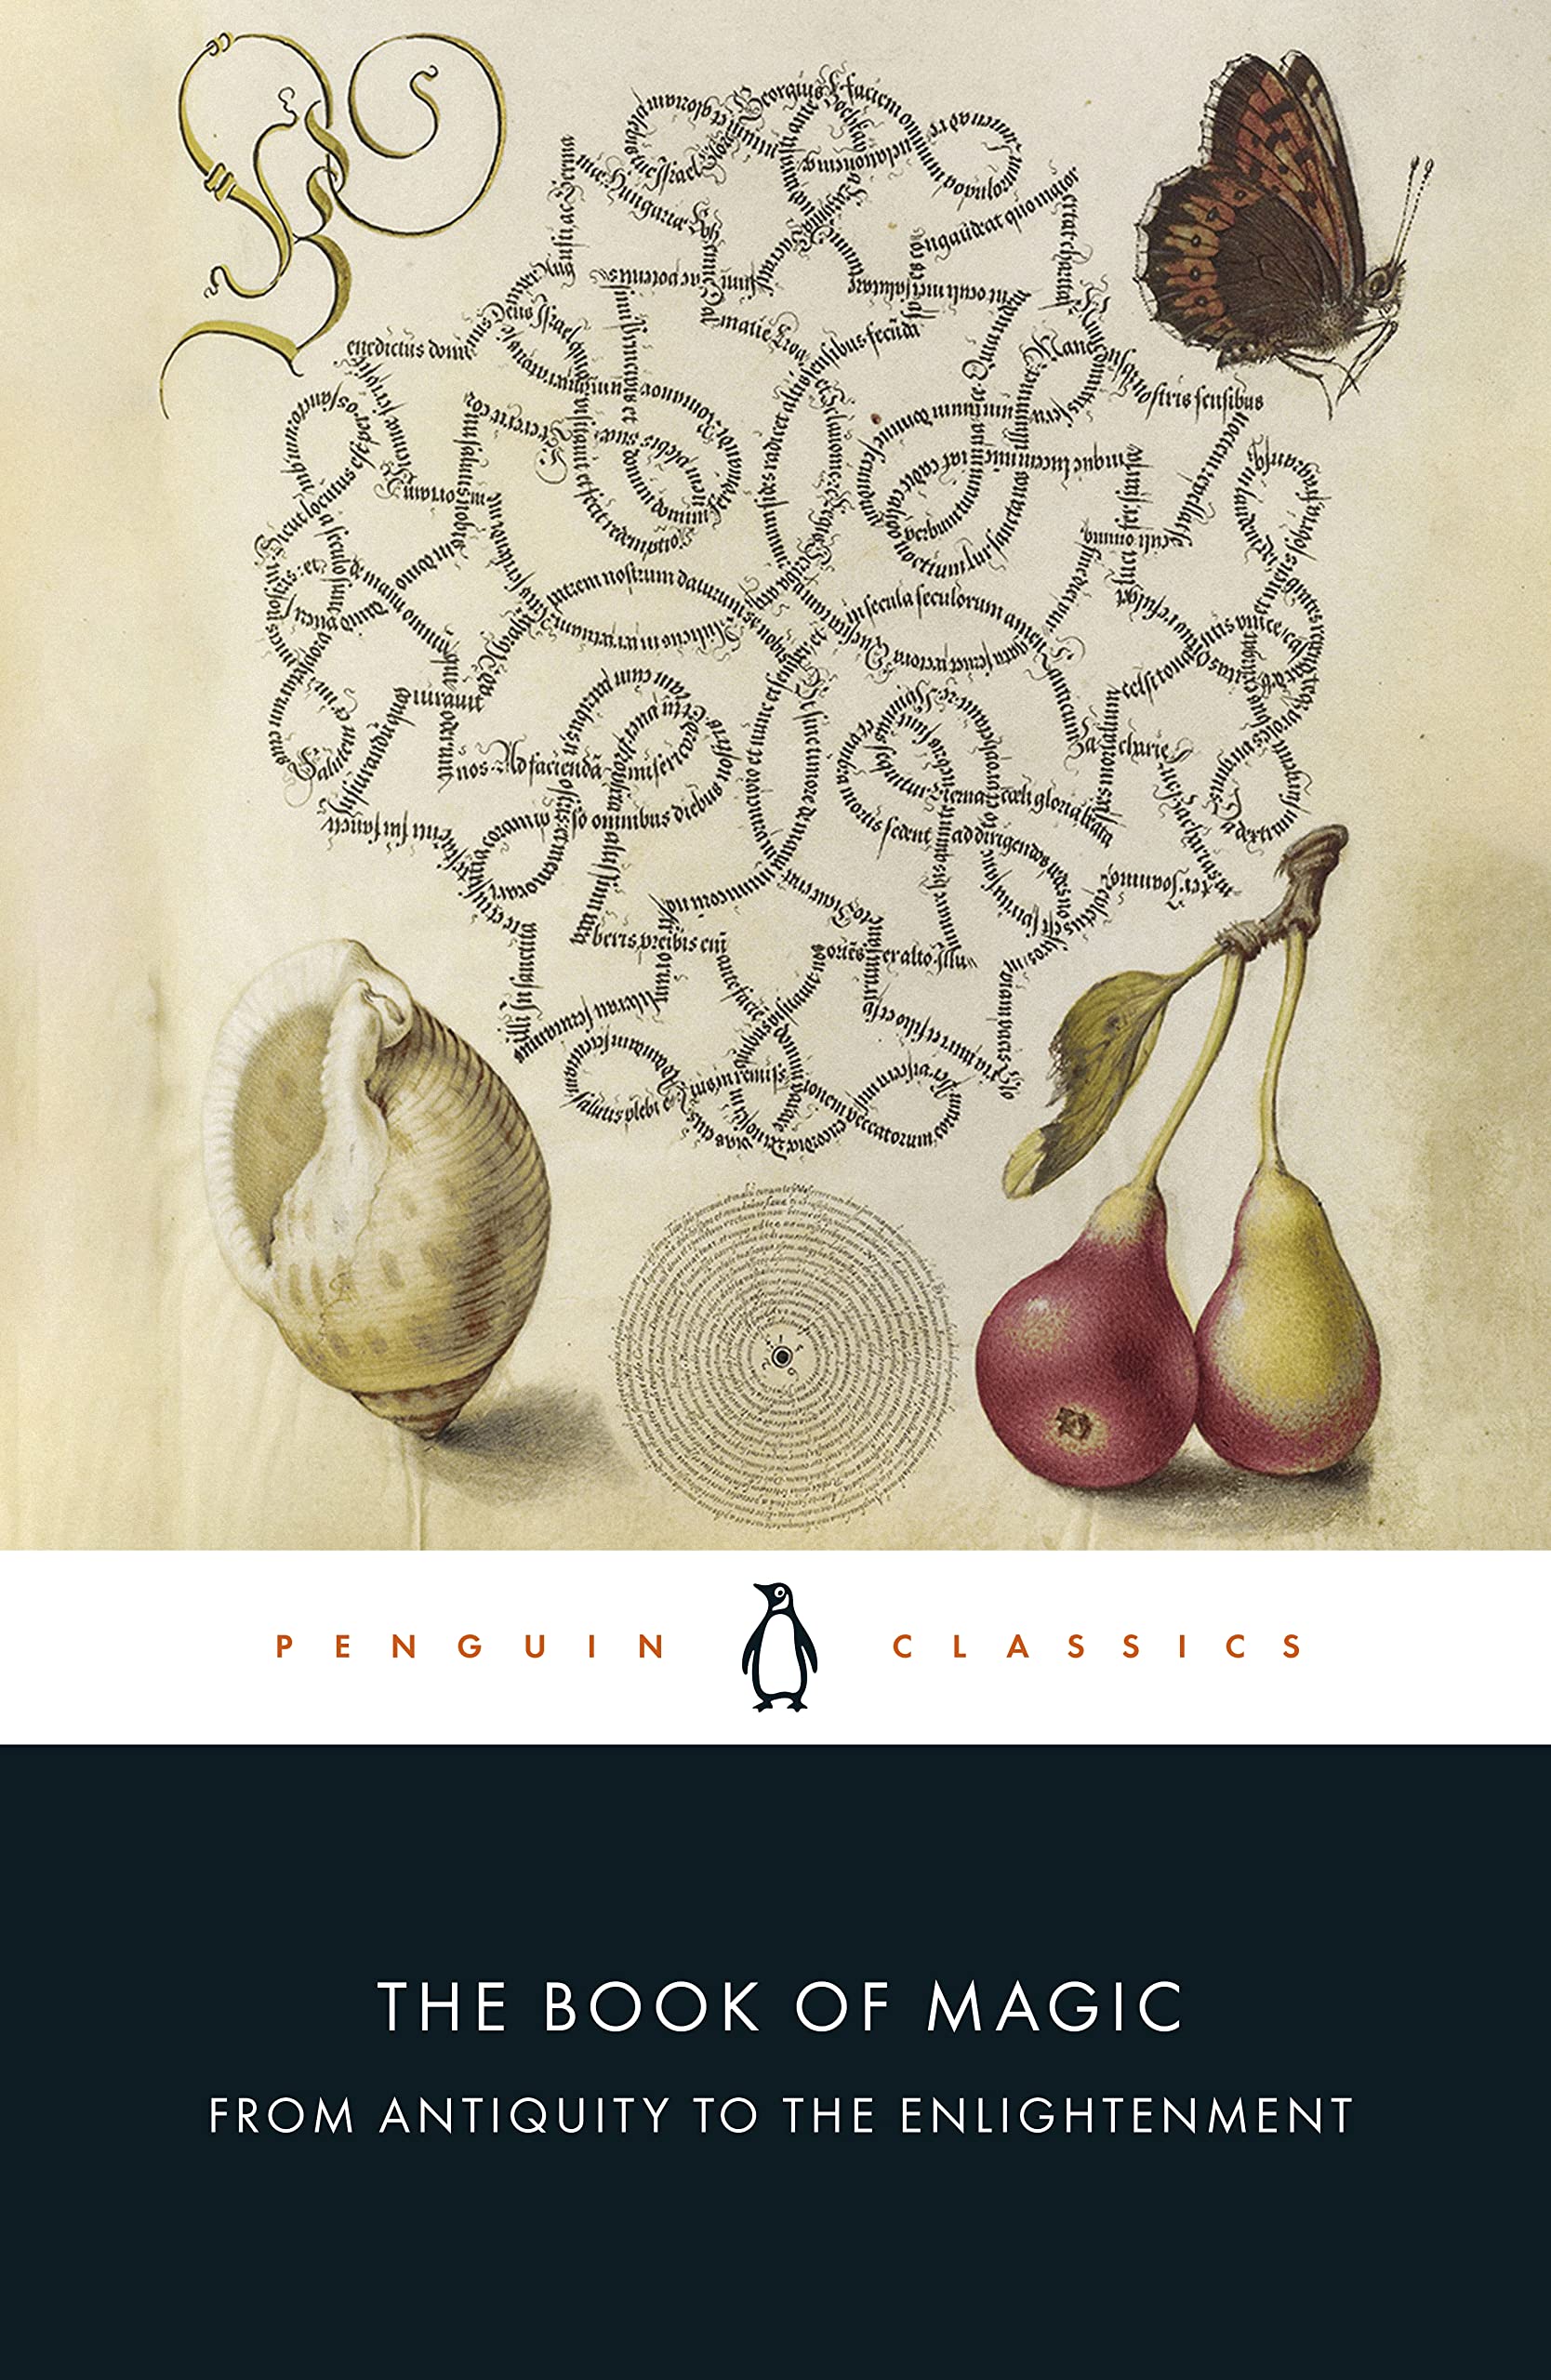 The Book of Magic: From Antiquity to the Enlightenment (Penguin Classics)